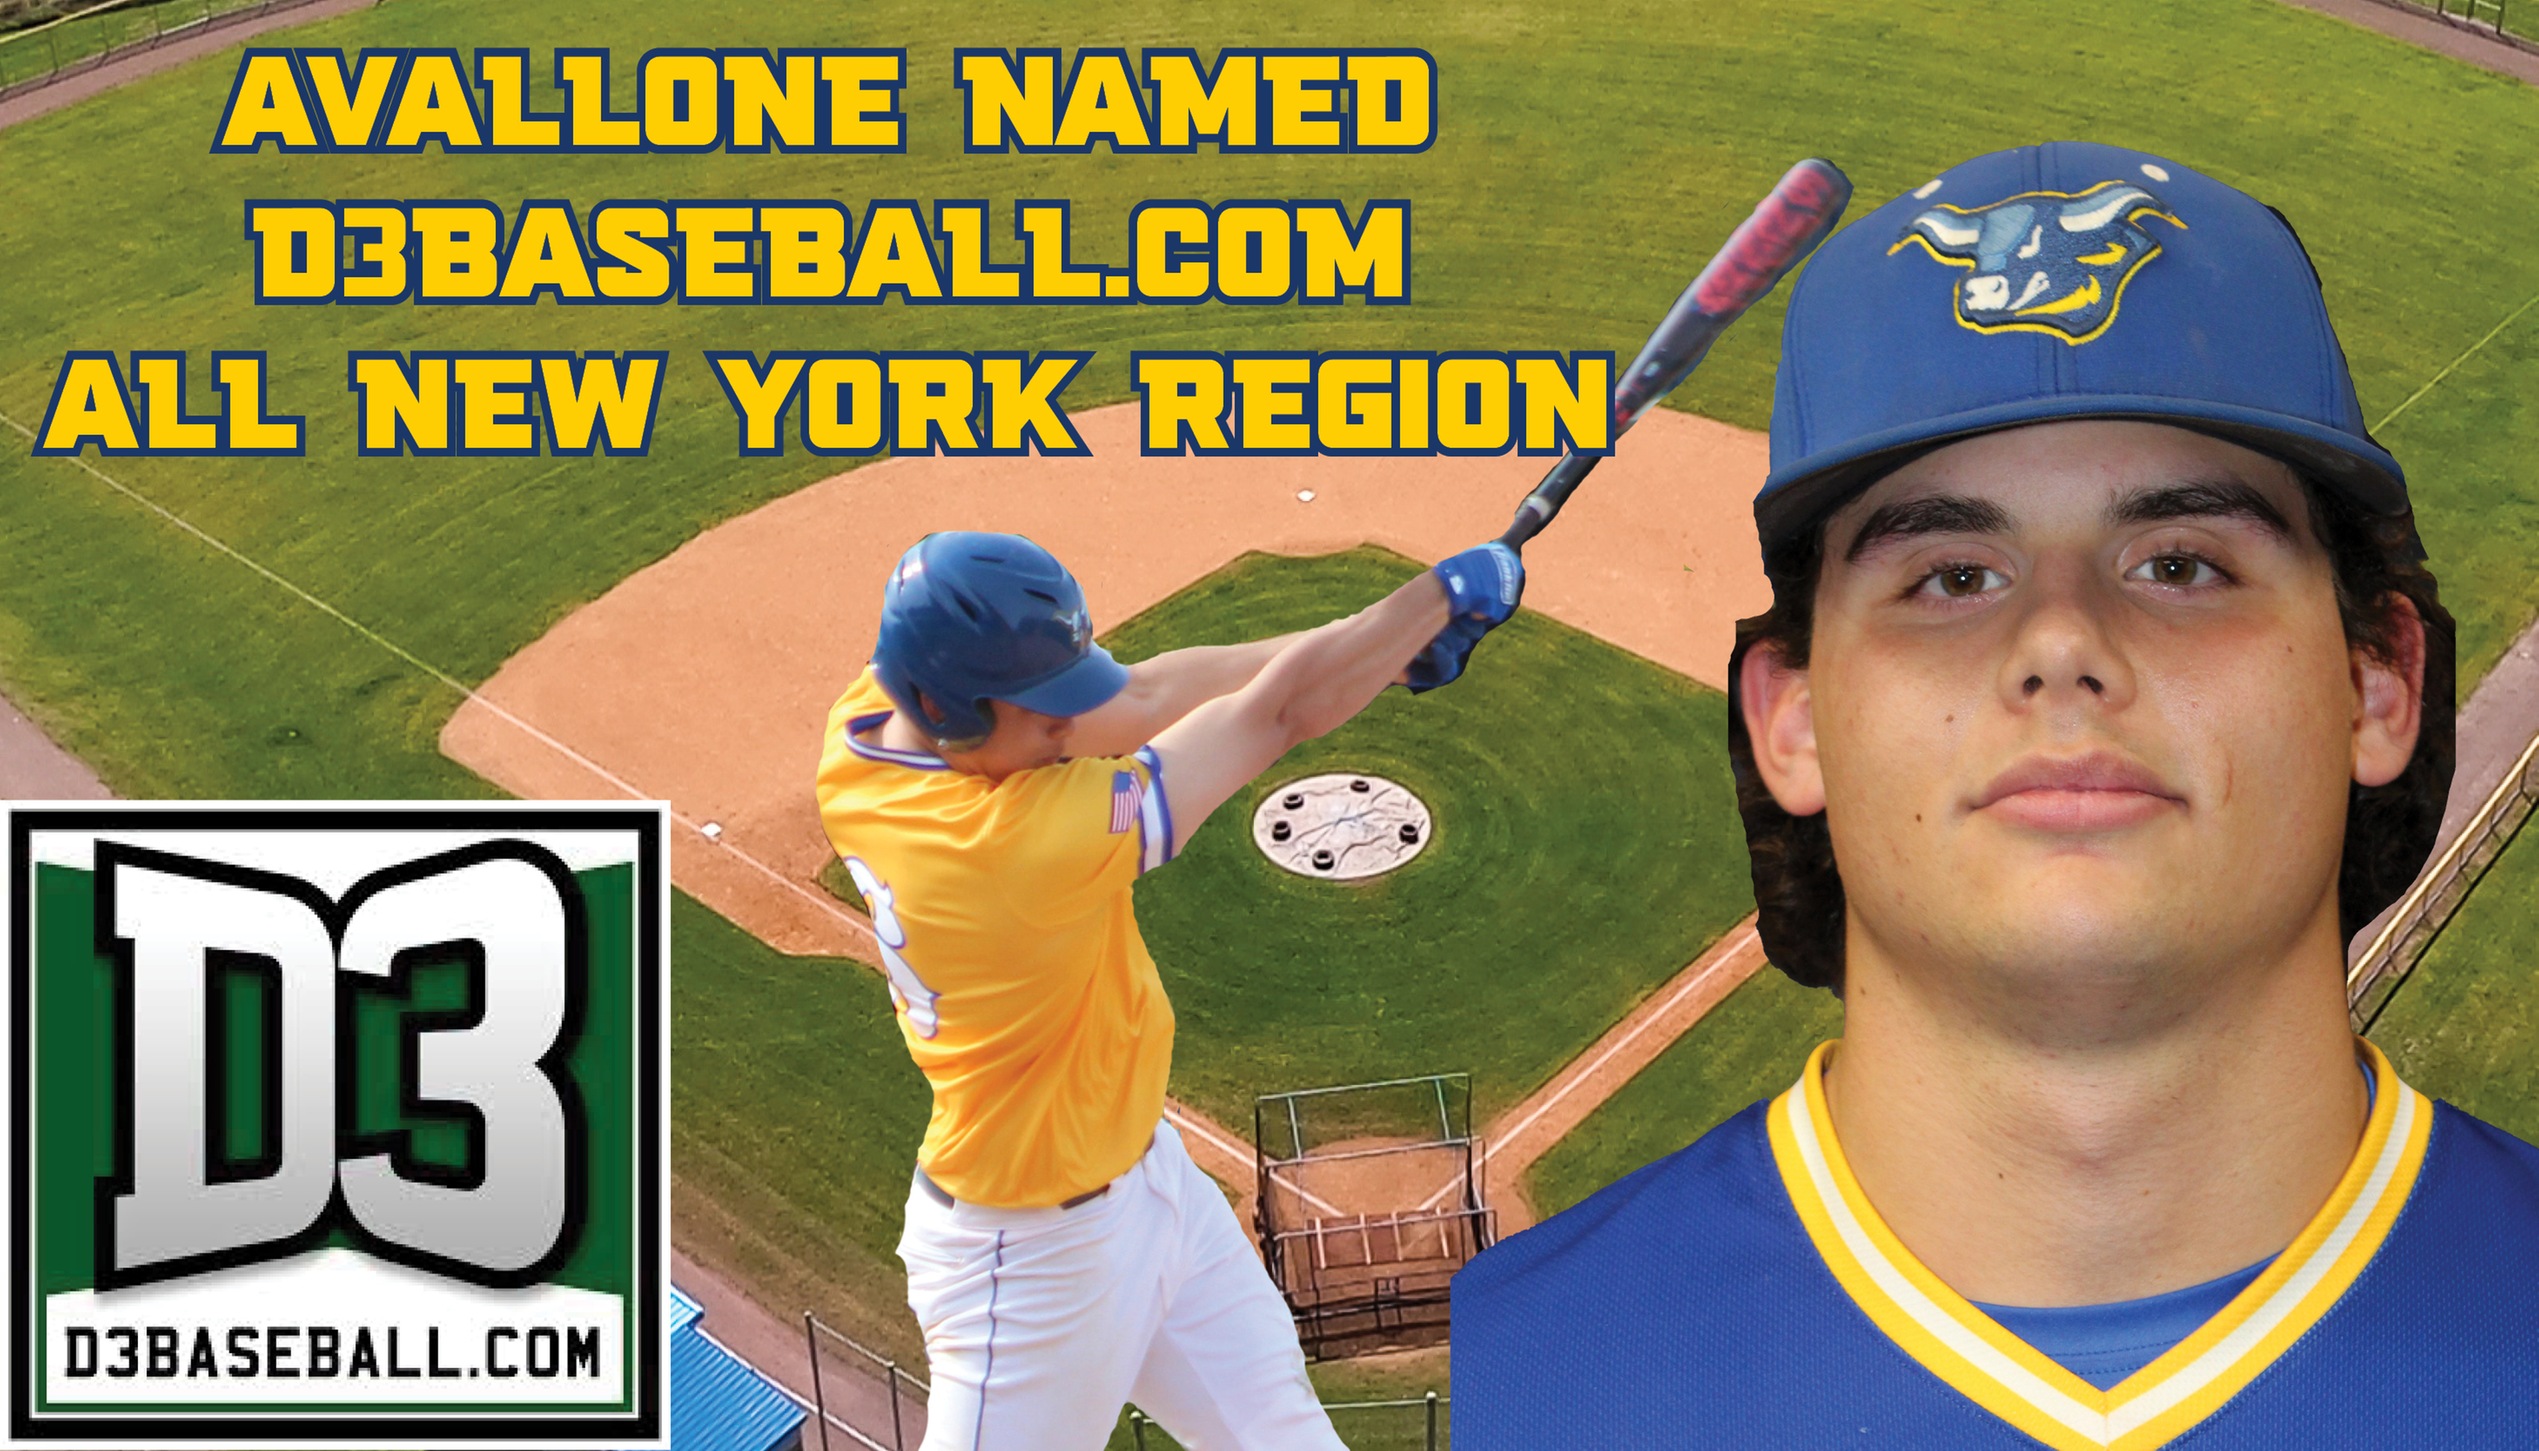 Matteo Avallone named D3baseball.com All-New York Region.

Avallone is pictured take a swing and his 2021 headshot.